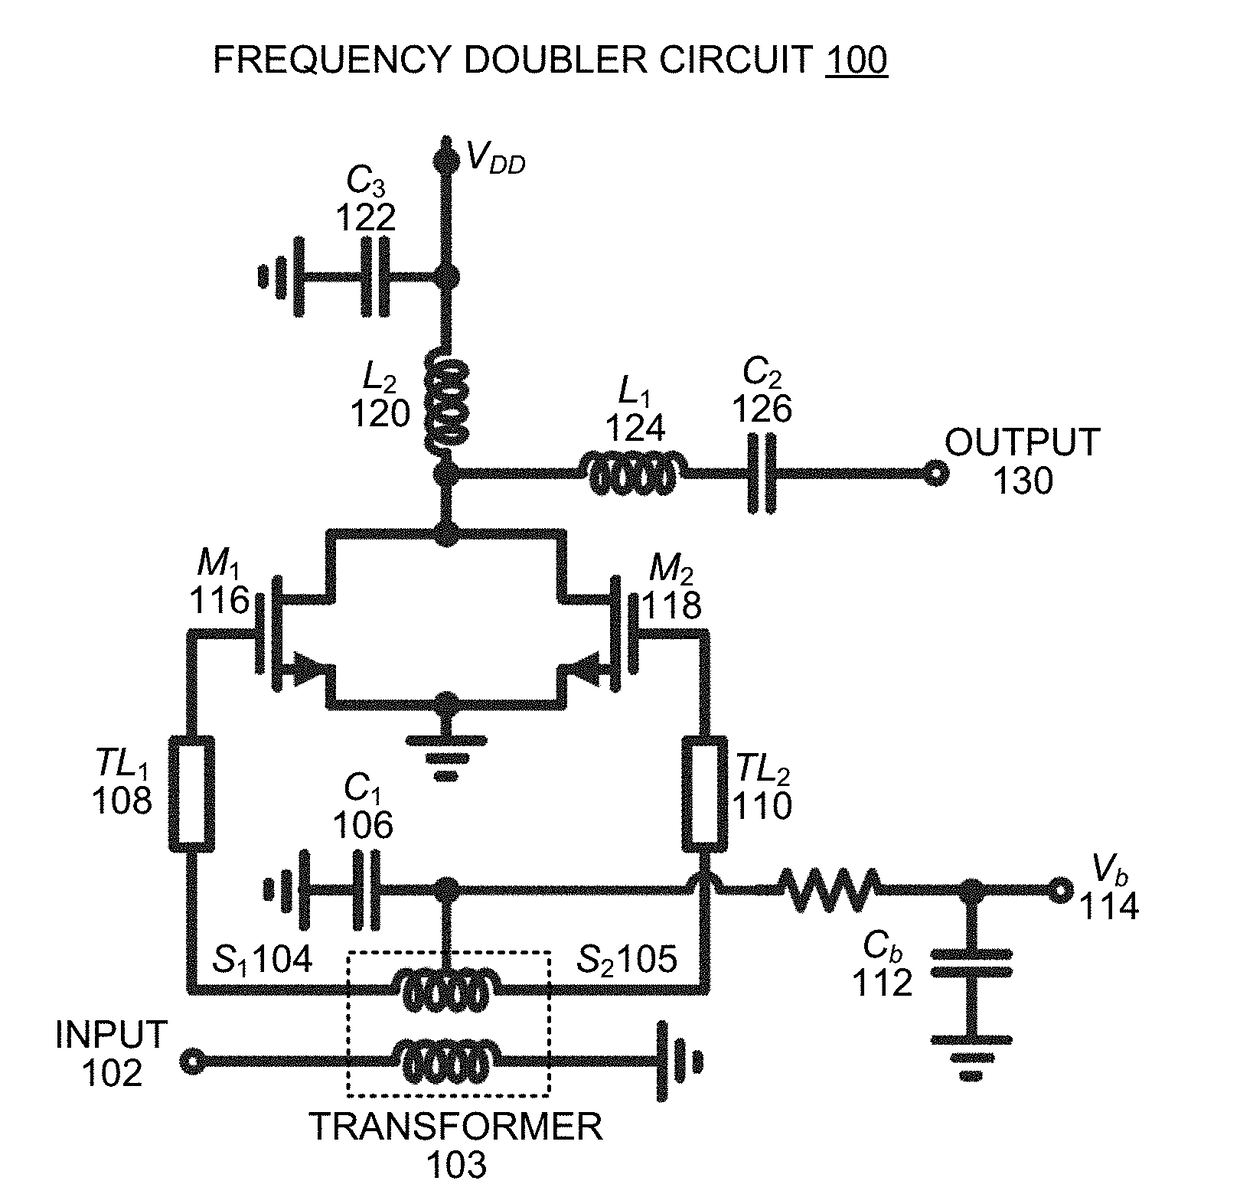 High-efficiency frequency doubler with a compensated transformer-based input balun